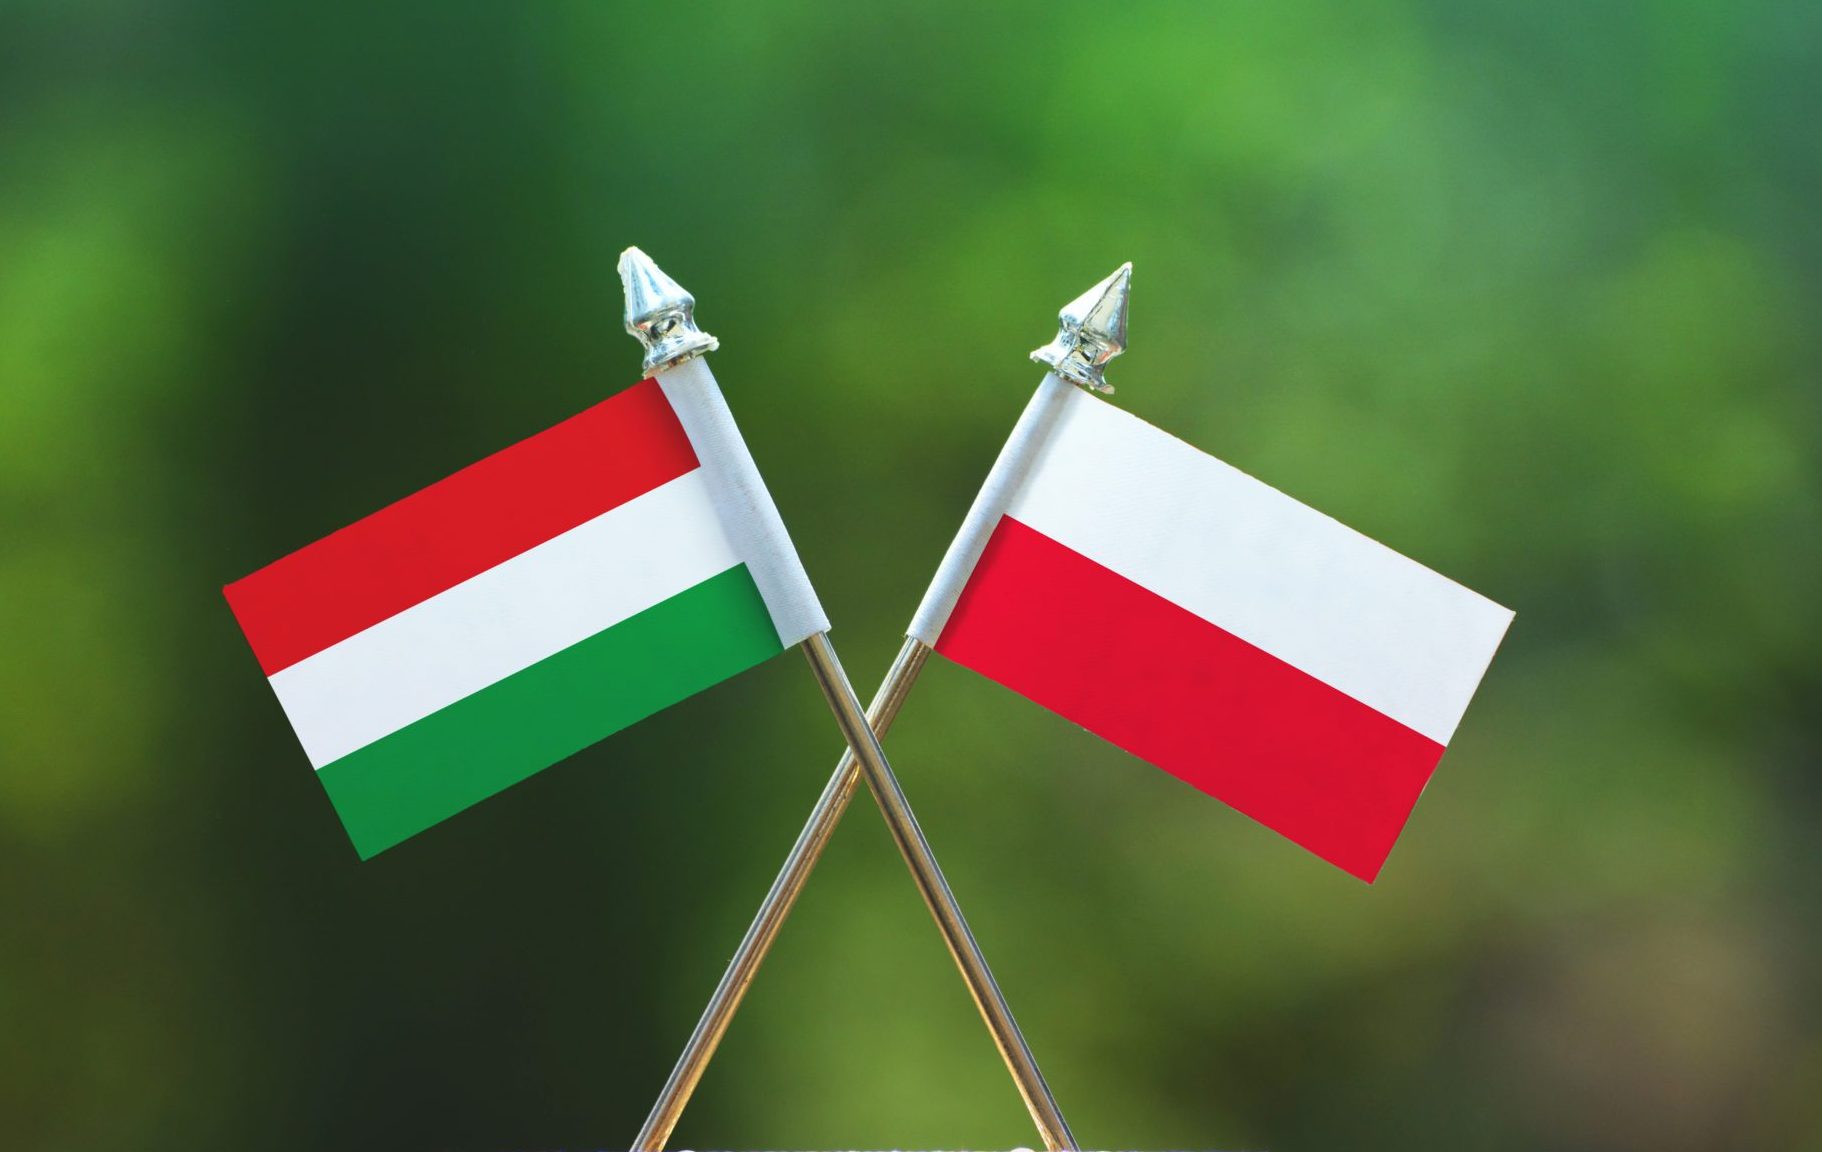 Poland,And,Hungary,Small,Flag,With,Blur,Green,Background